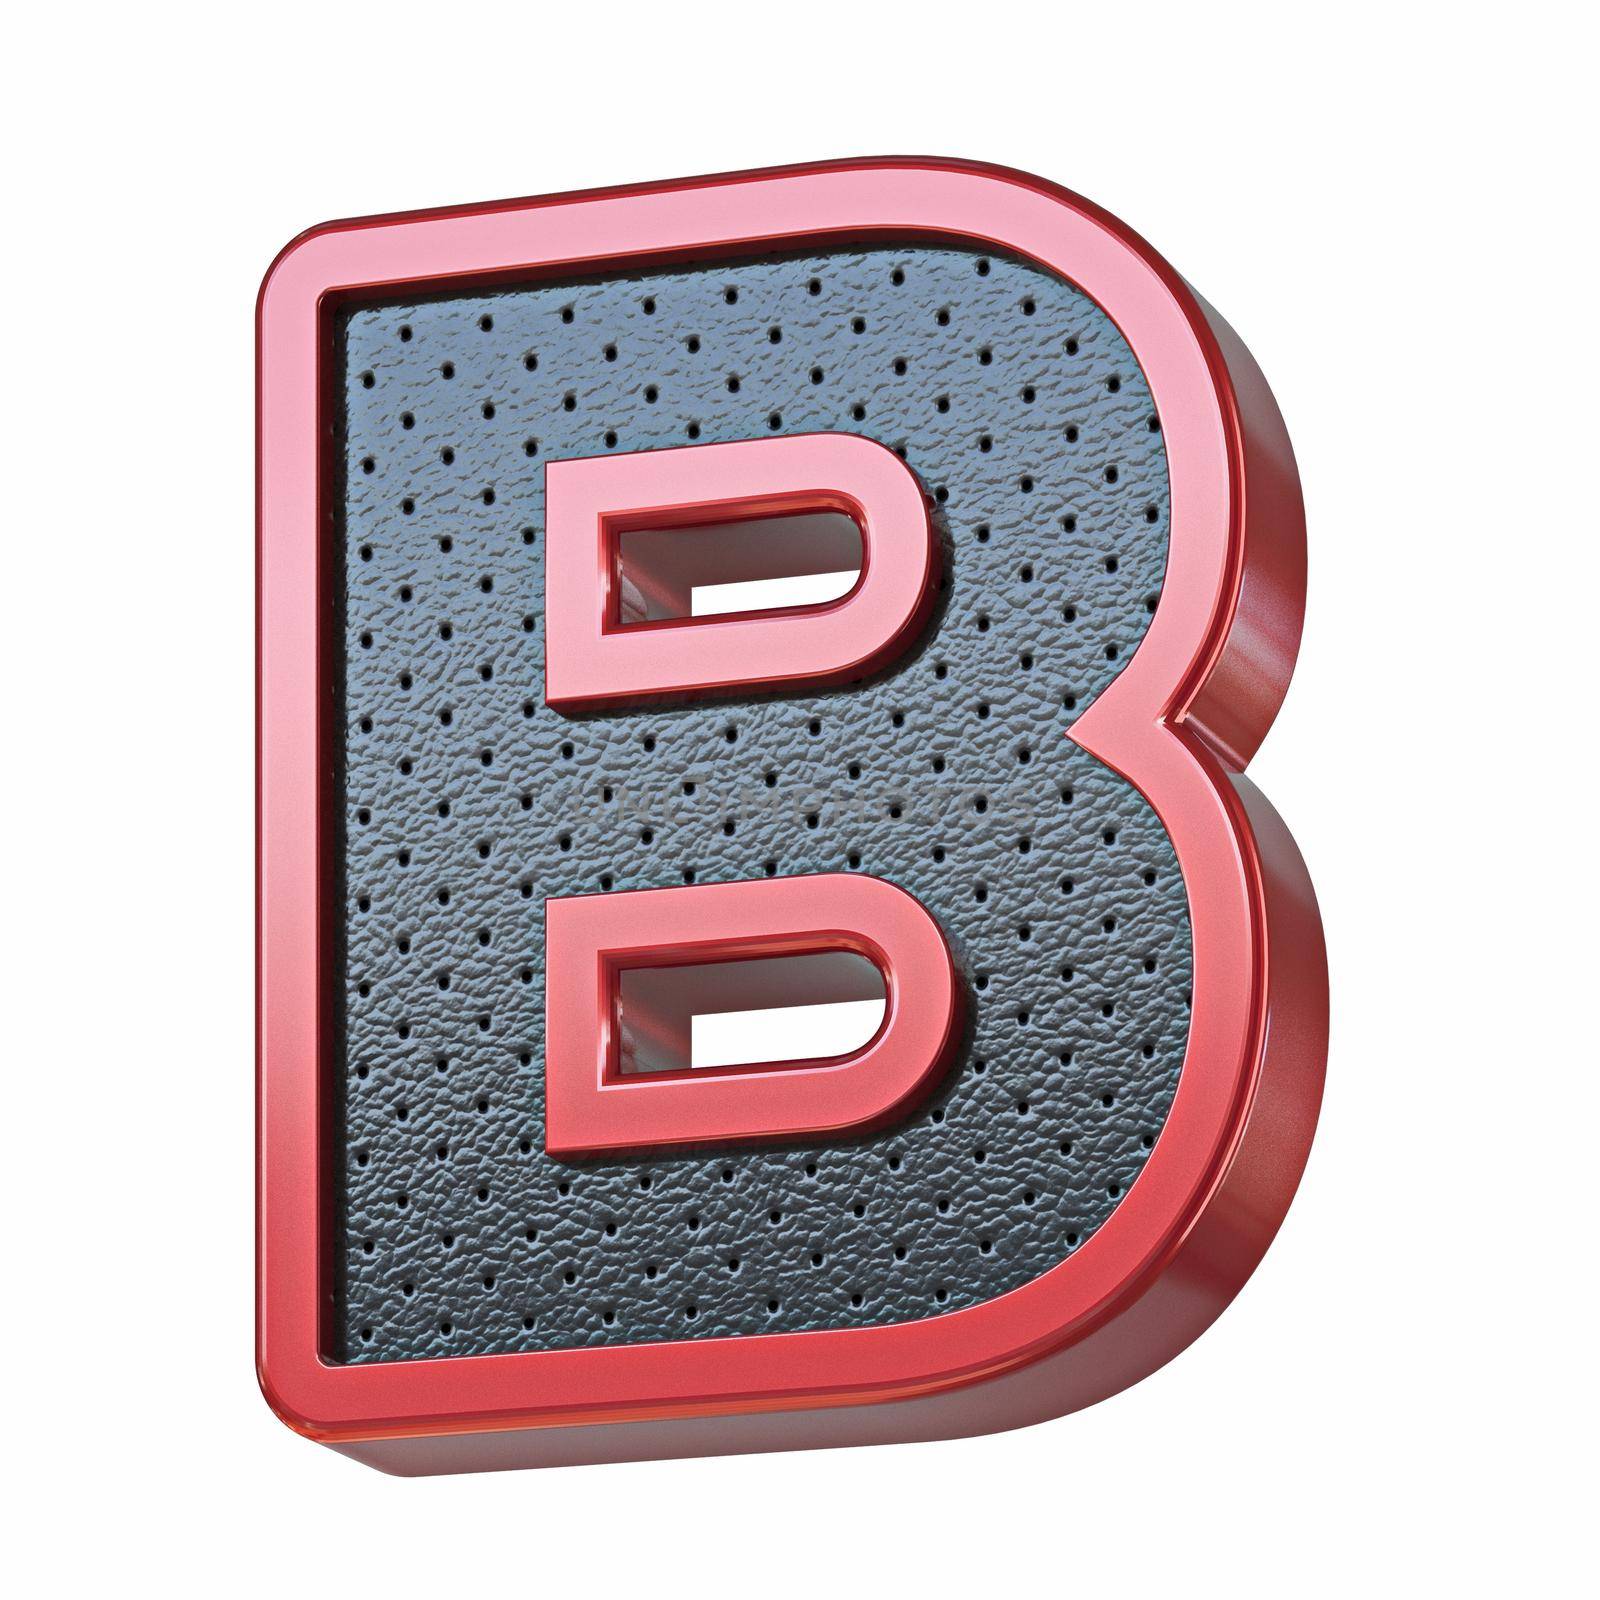 Red shinny metal and black leather font Letter B 3D render illustration isolated on white background